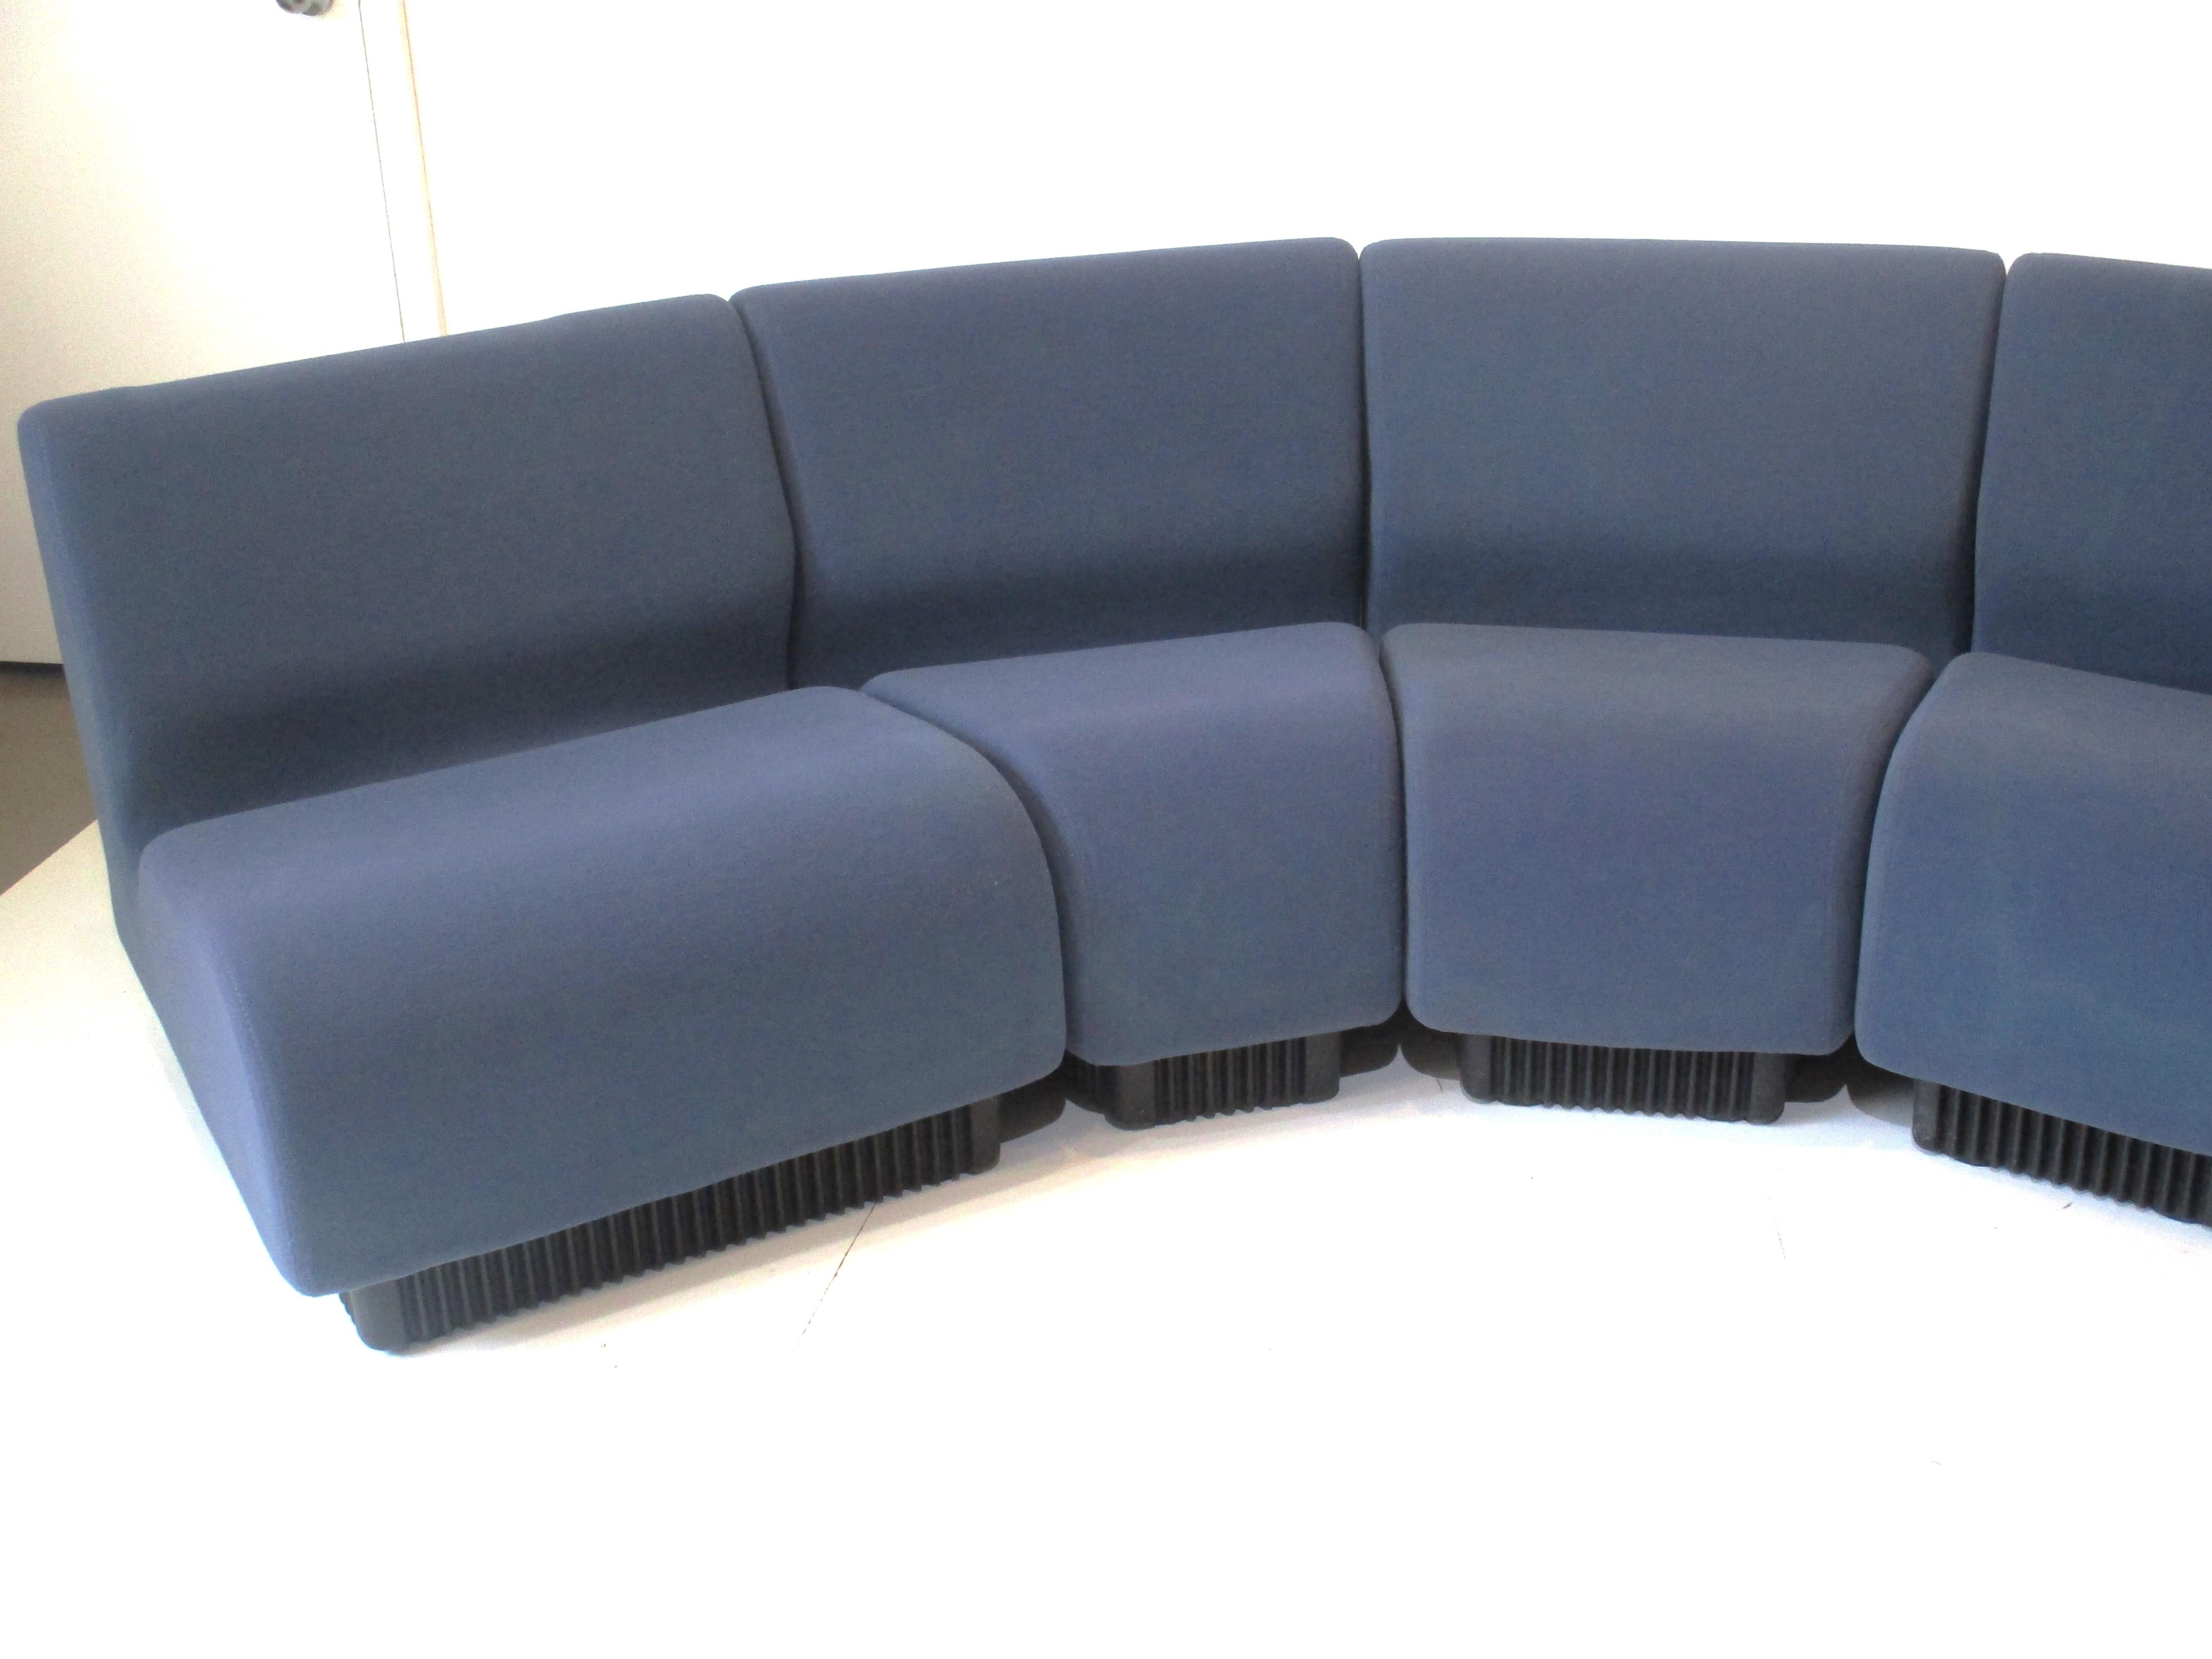 A six piece modular sofa set in a lighter cobalt blue with black ABS plastic kick bases. These pie shaped seating pieces are covered in a contract fabric that is soft and able to stretch a bit to conform to the shapes, the pieces can be set up in